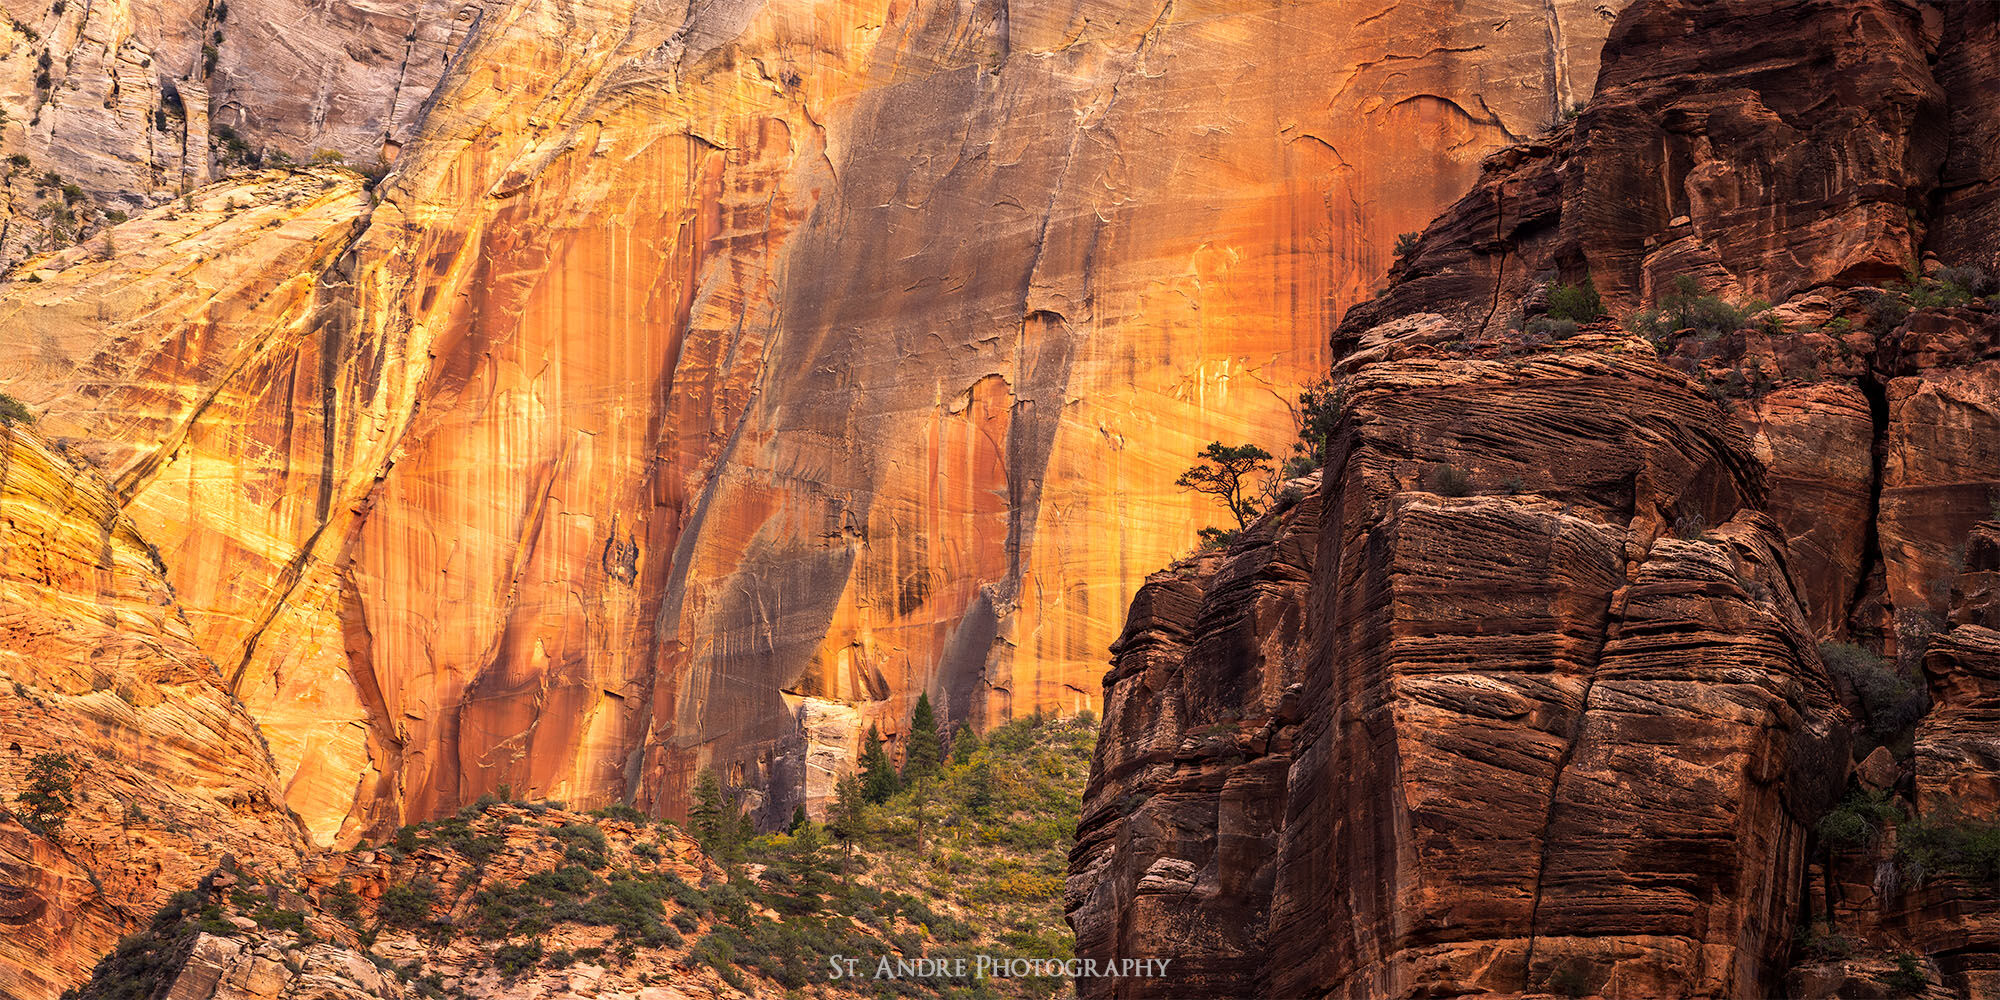 Lit up canyons walls of Zion National Park near Big Bend, below Cable Mountain.